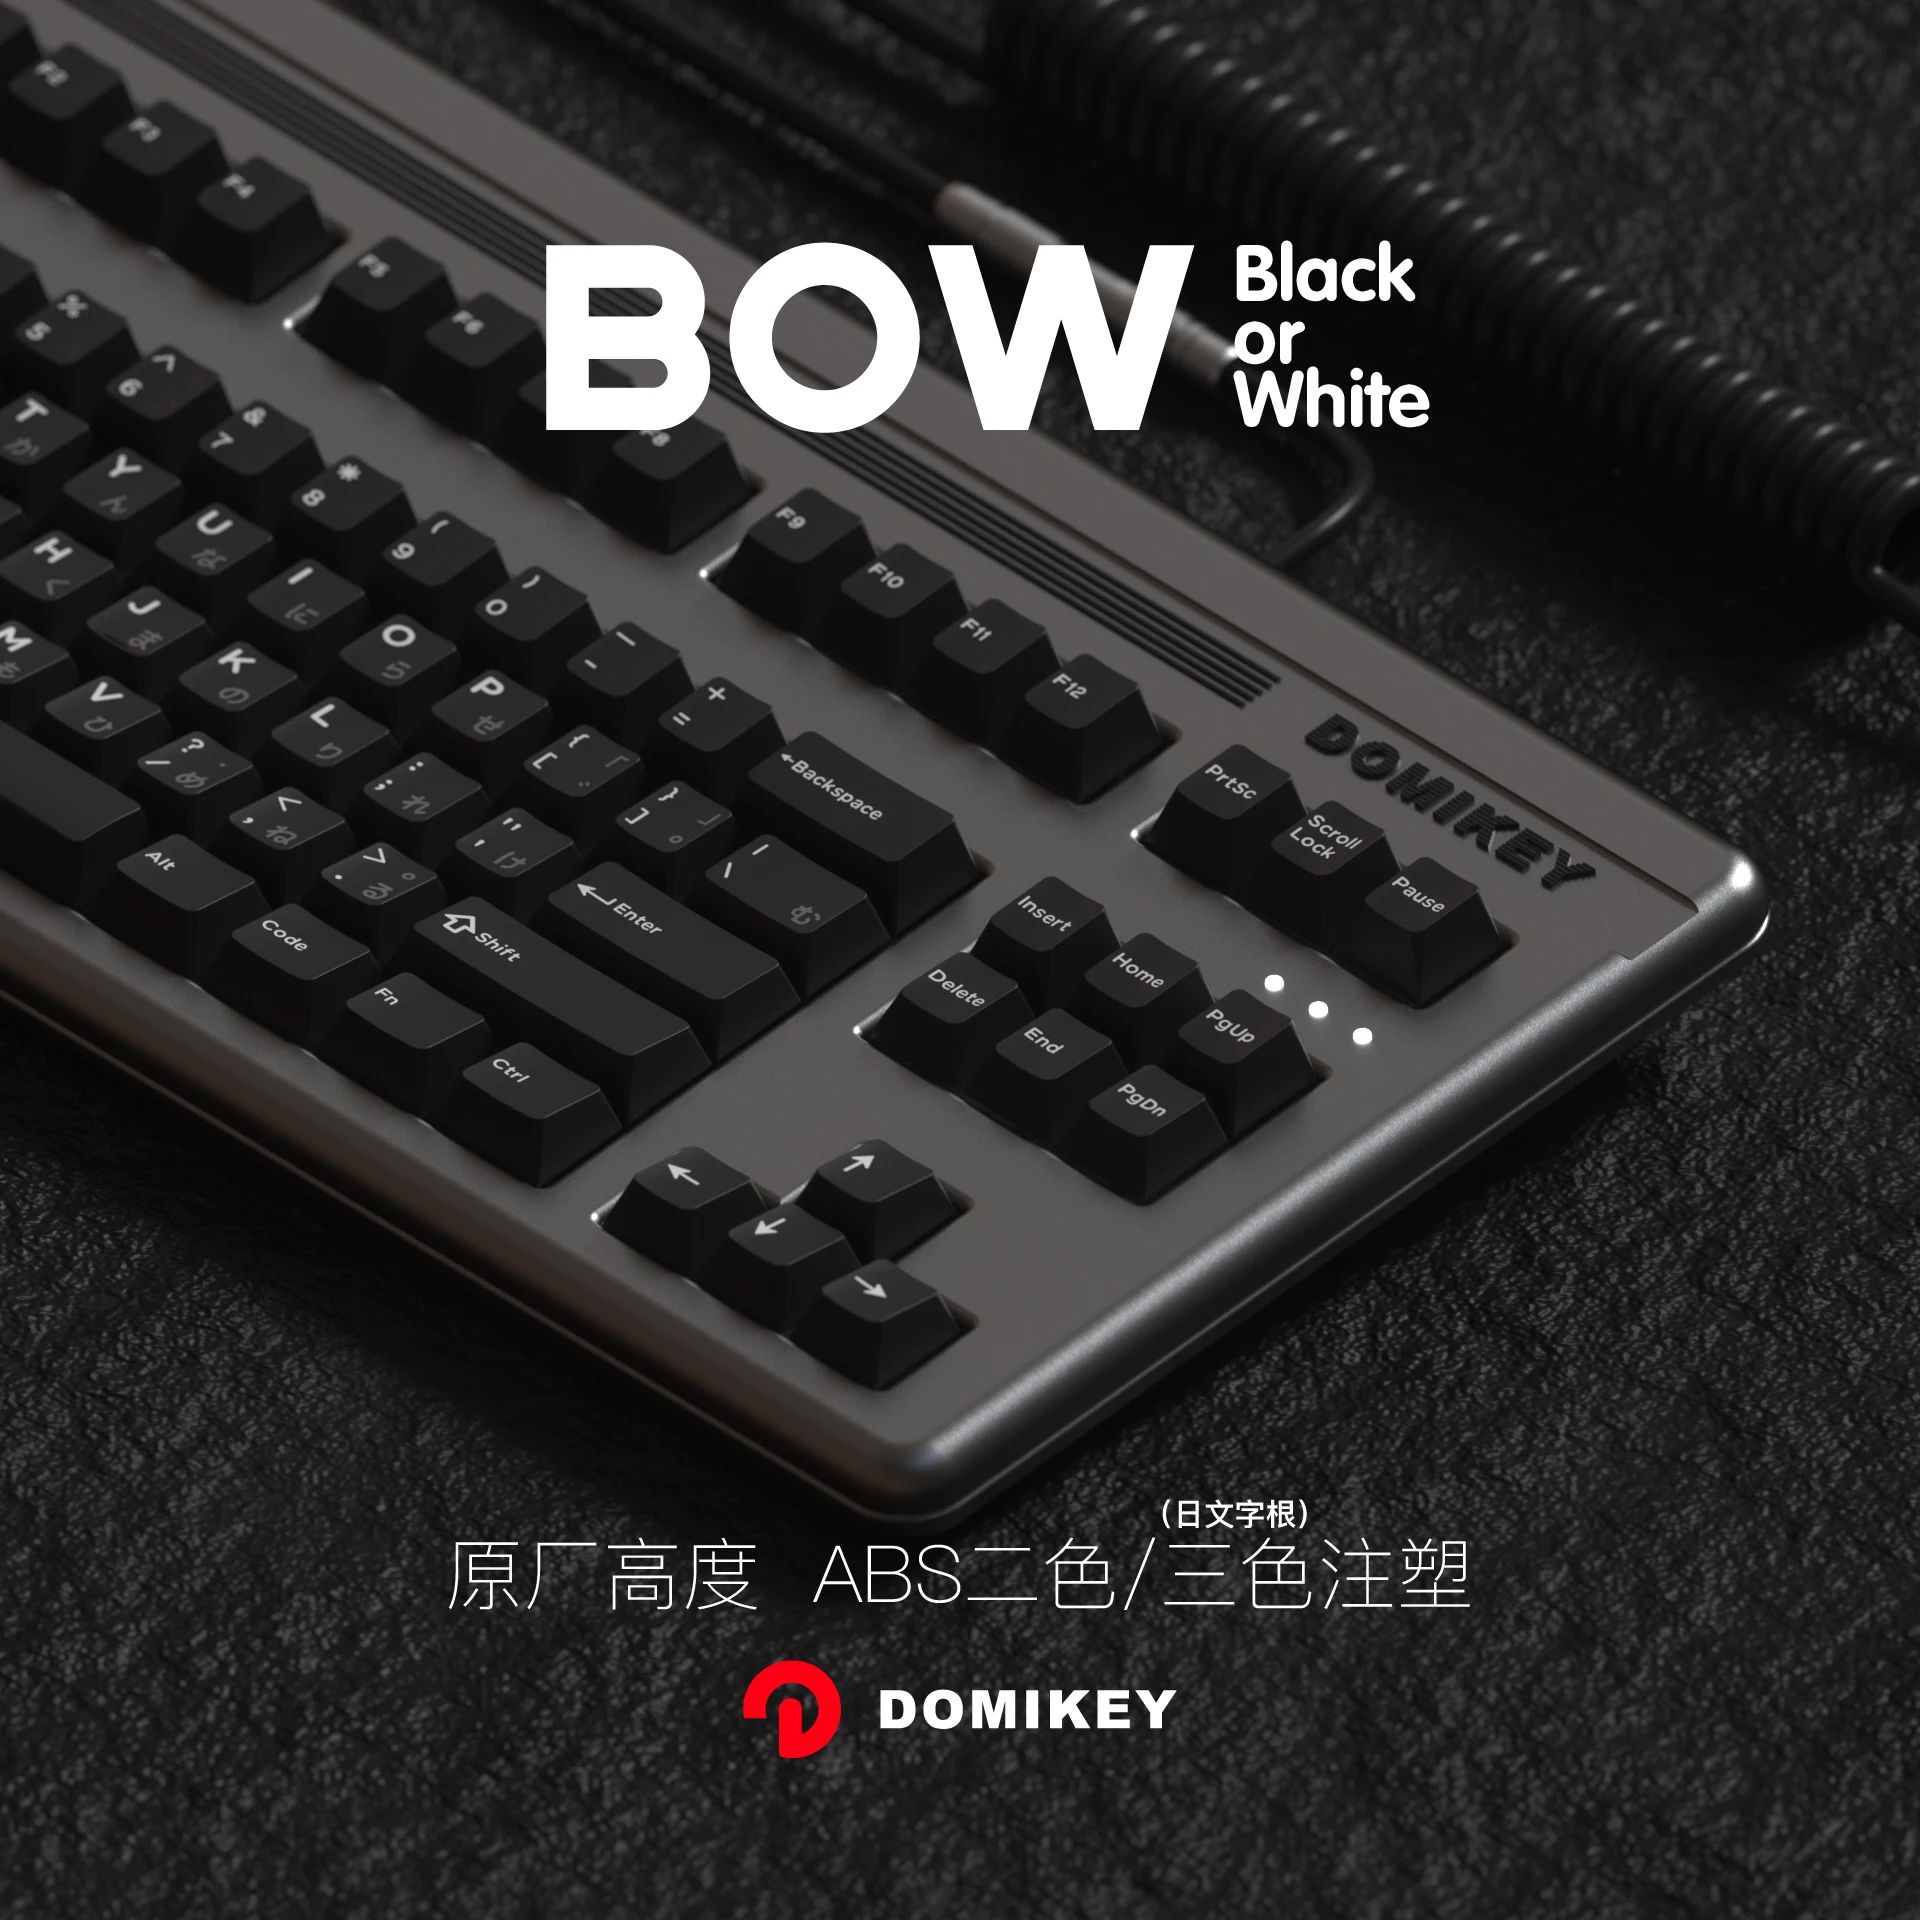 grab bag All Random about 600g one pack Domikey r1 r2 r3 r4 doubleshot keycap tech random package best keyboard for home office